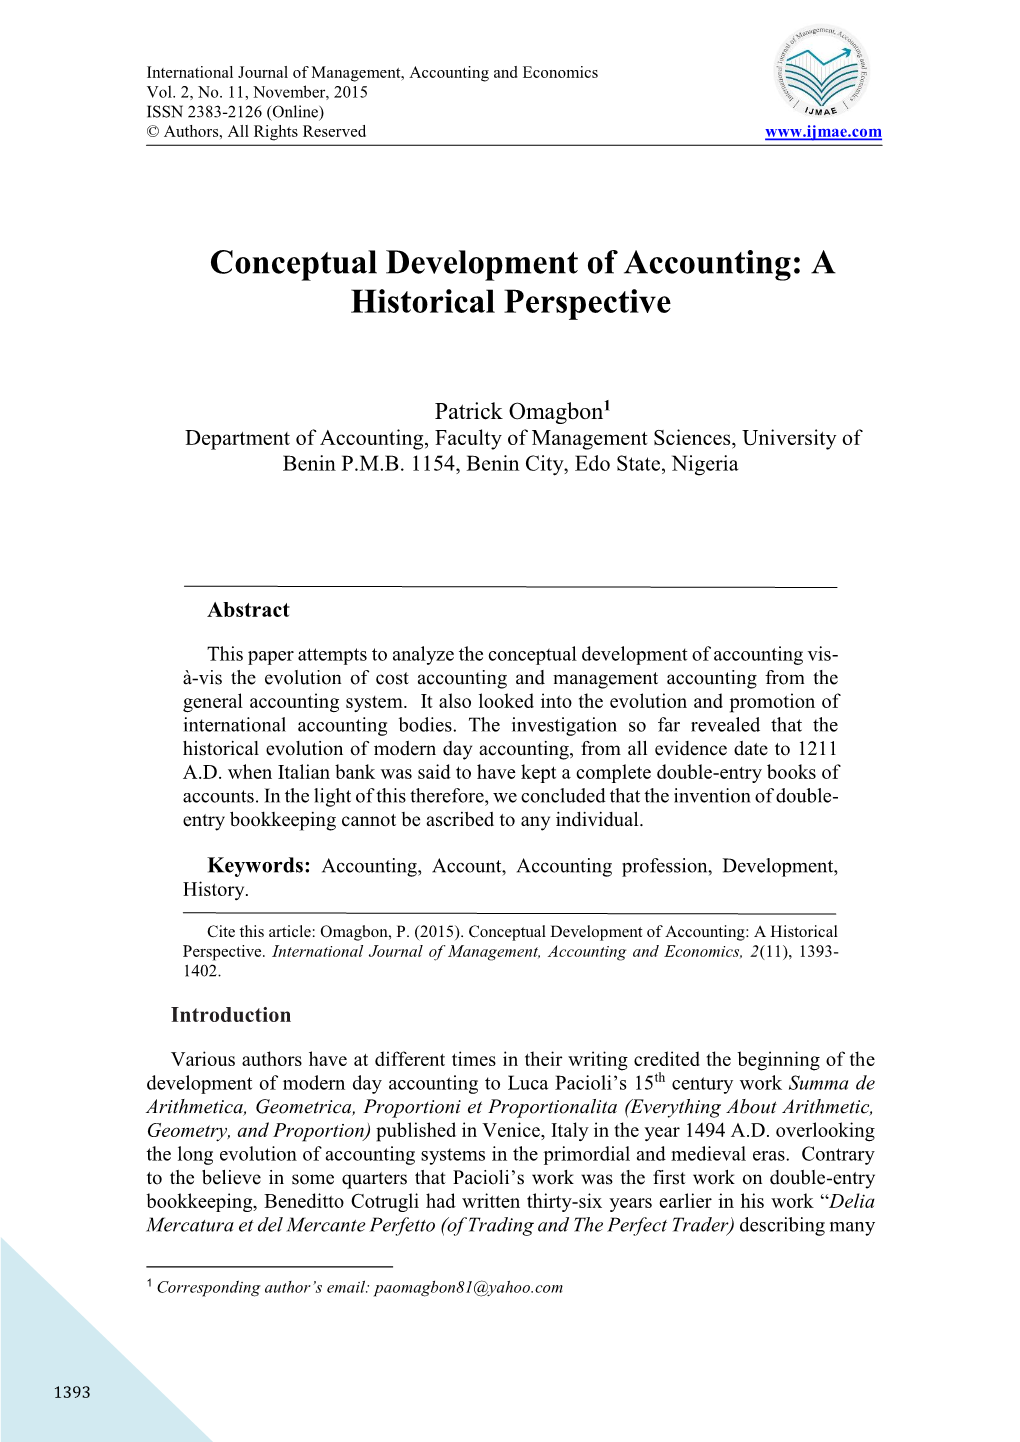 Conceptual Development of Accounting: a Historical Perspective